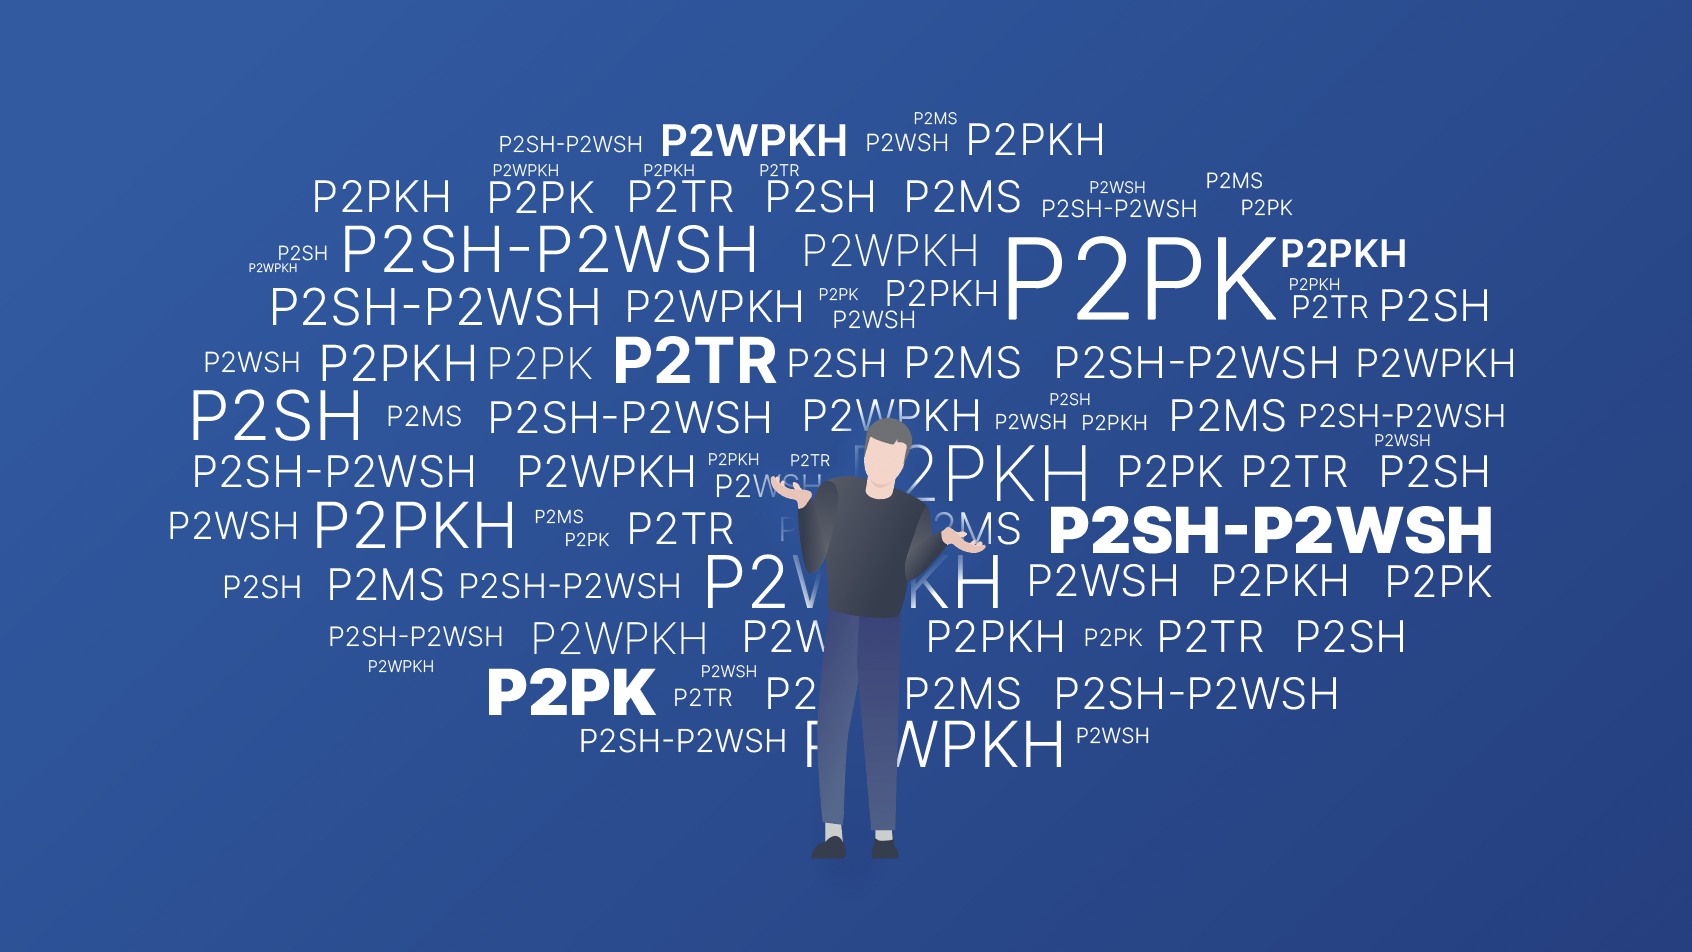 Bitcoin address types compared: P2PKH, P2SH, P2WPKH, and more - Unchained